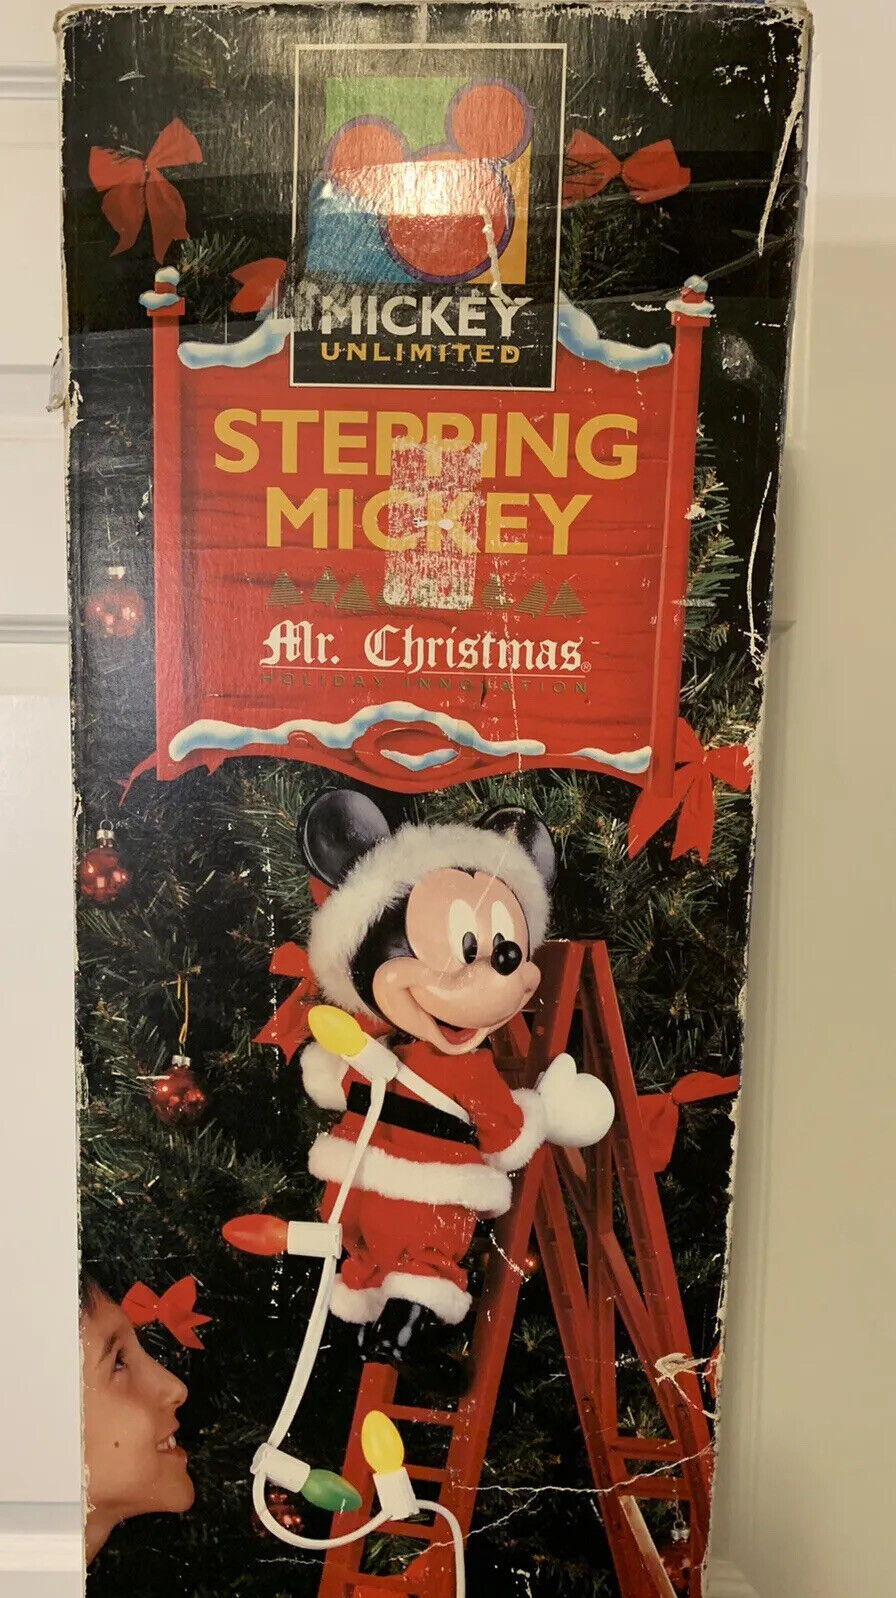 Vintage Mr.Christmas Stepping Mickey 1995 Mickey UNLIMITED Read Description Rare